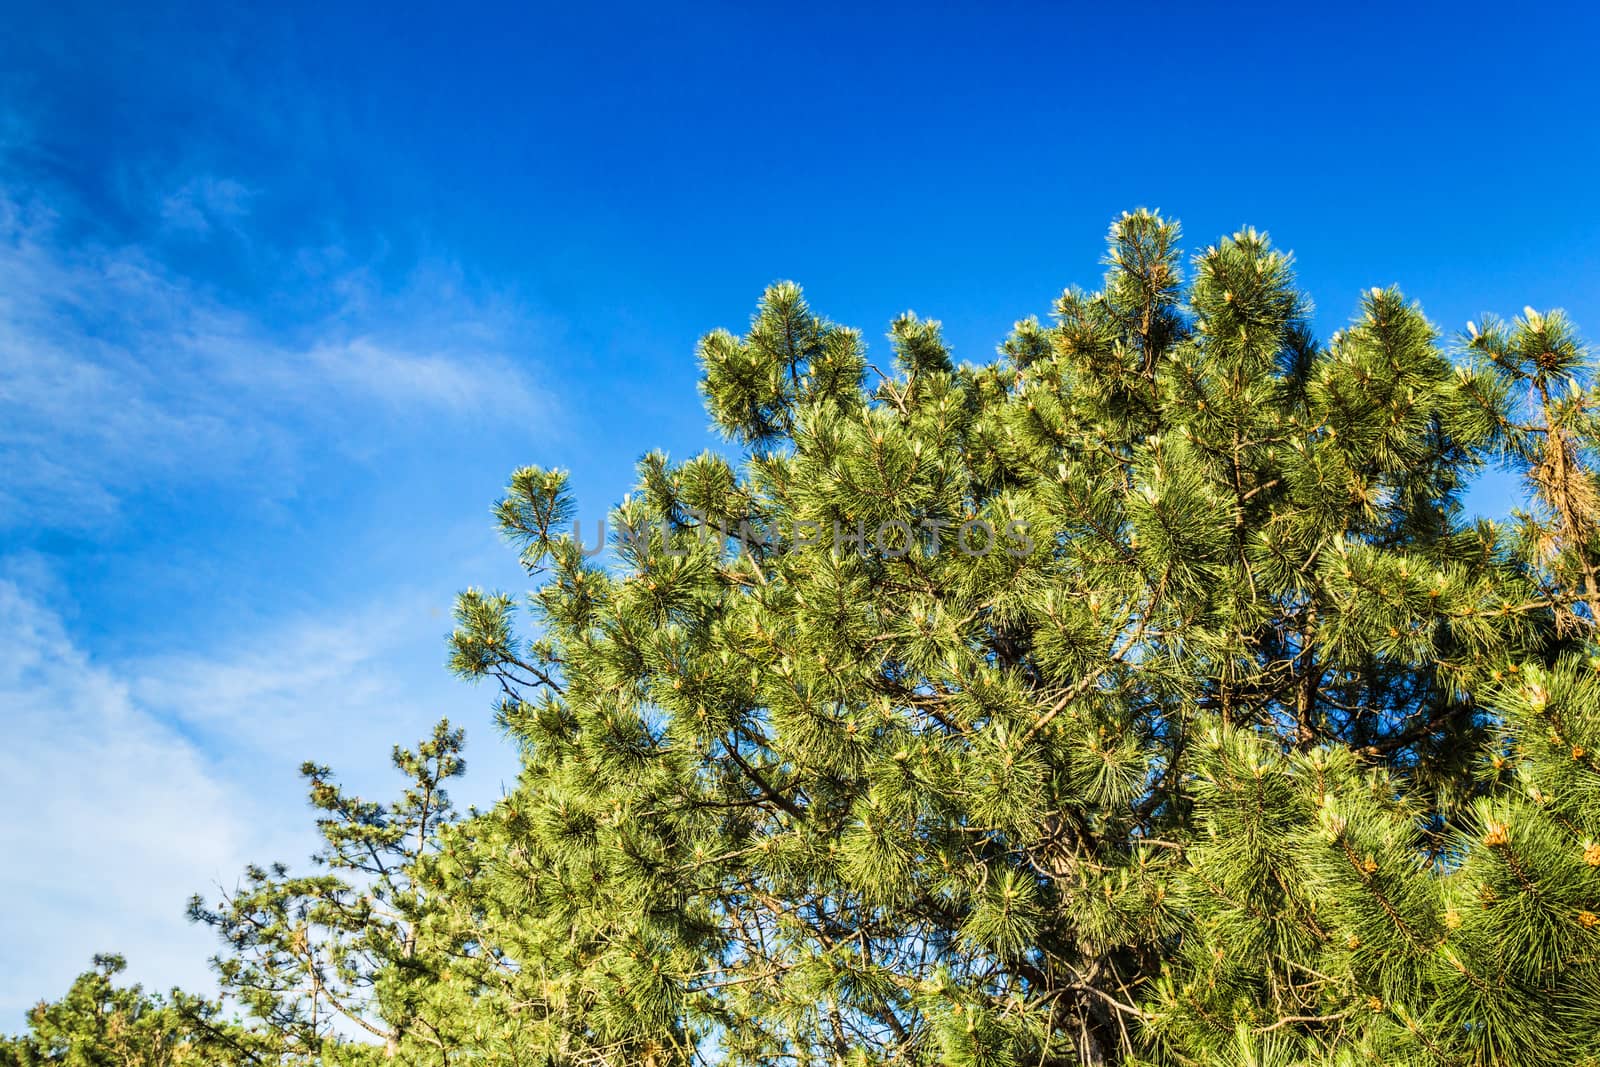 A beautiful krone of coniferous tree against the blue sky background